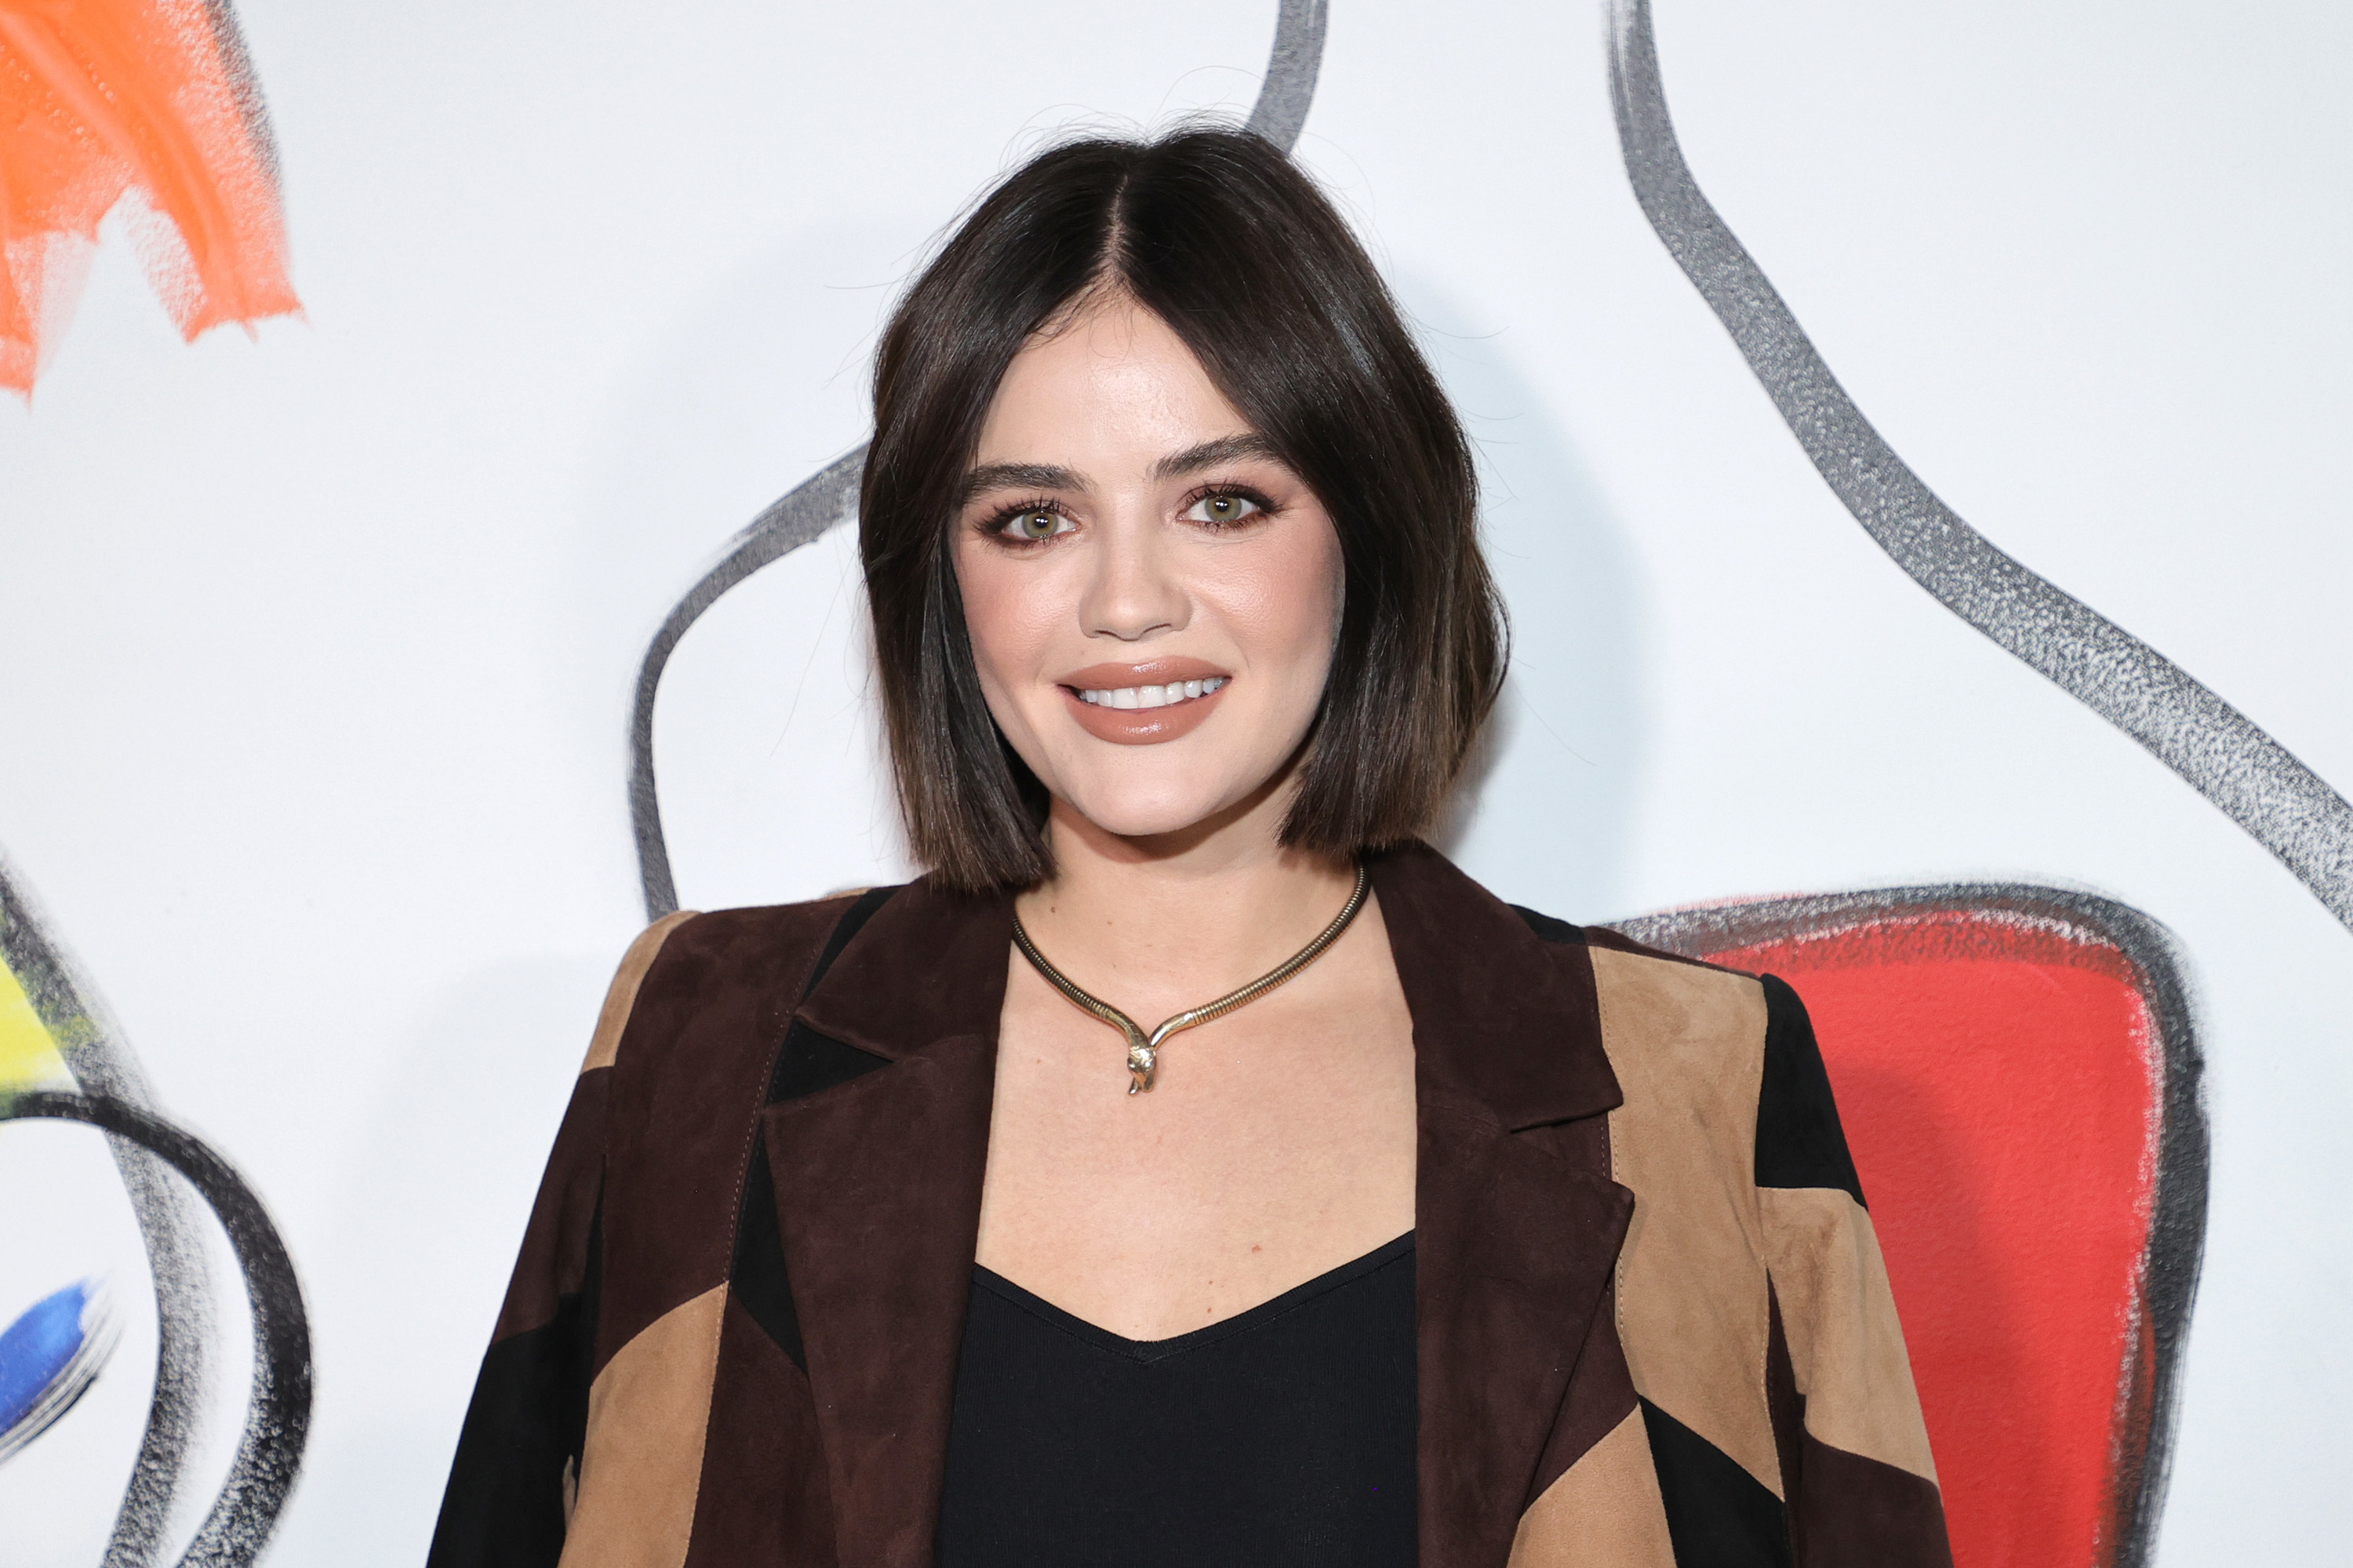 Lucy Hale smiling